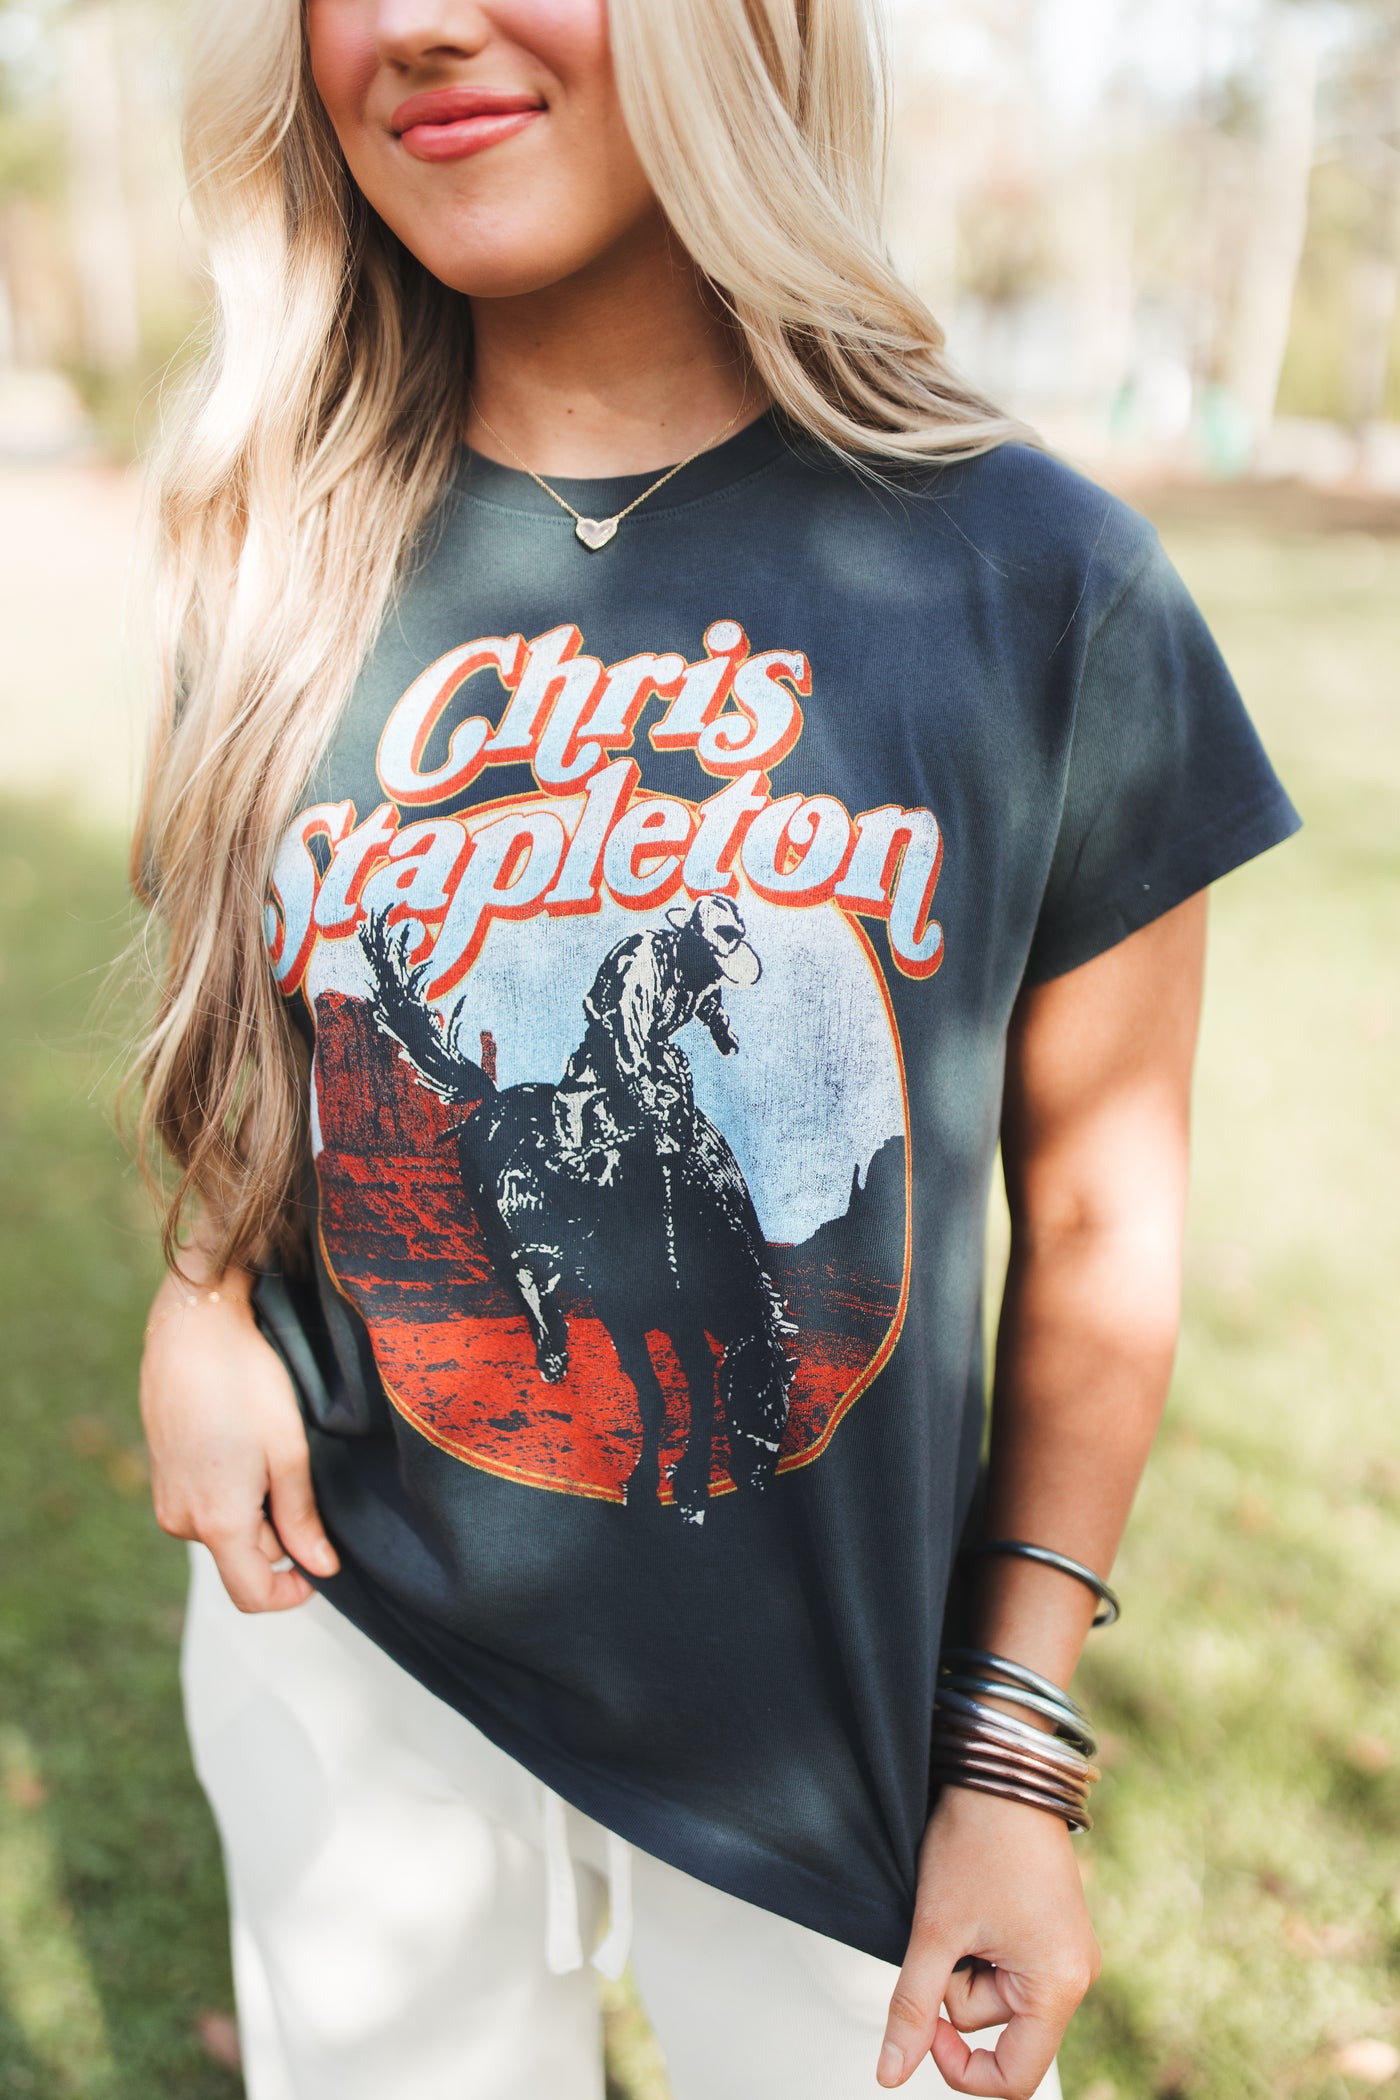 Daydreamer Chris Stapleton Horse and Canyons Tour Tee